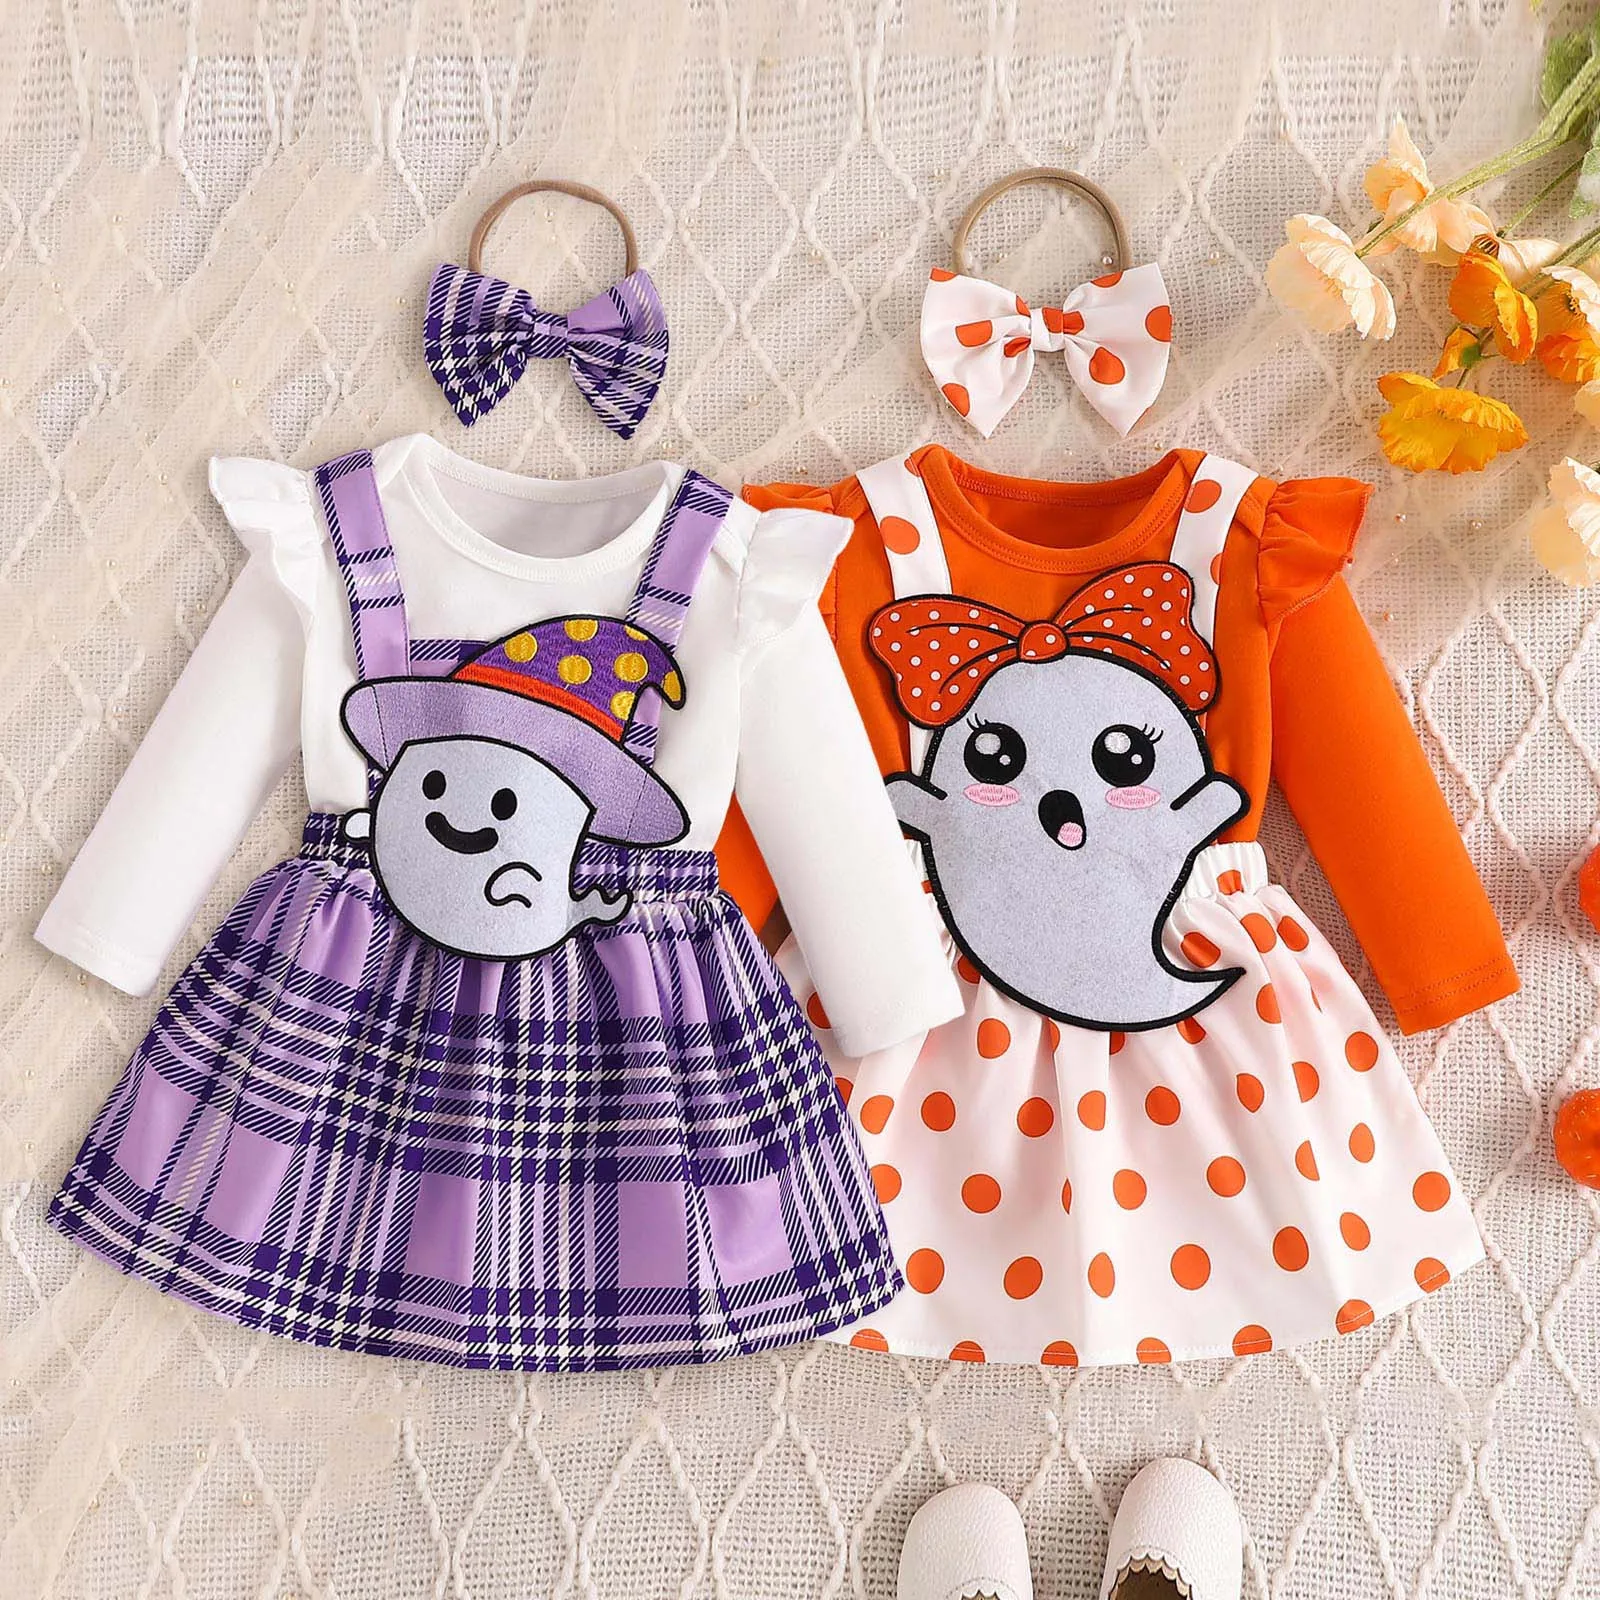 

Baby Boys & Girl Easter Infant Newborn Baby Girl Clothes Sets Short Sleeve Rompers Rabbit Embroidery Skirts Headband Outfits